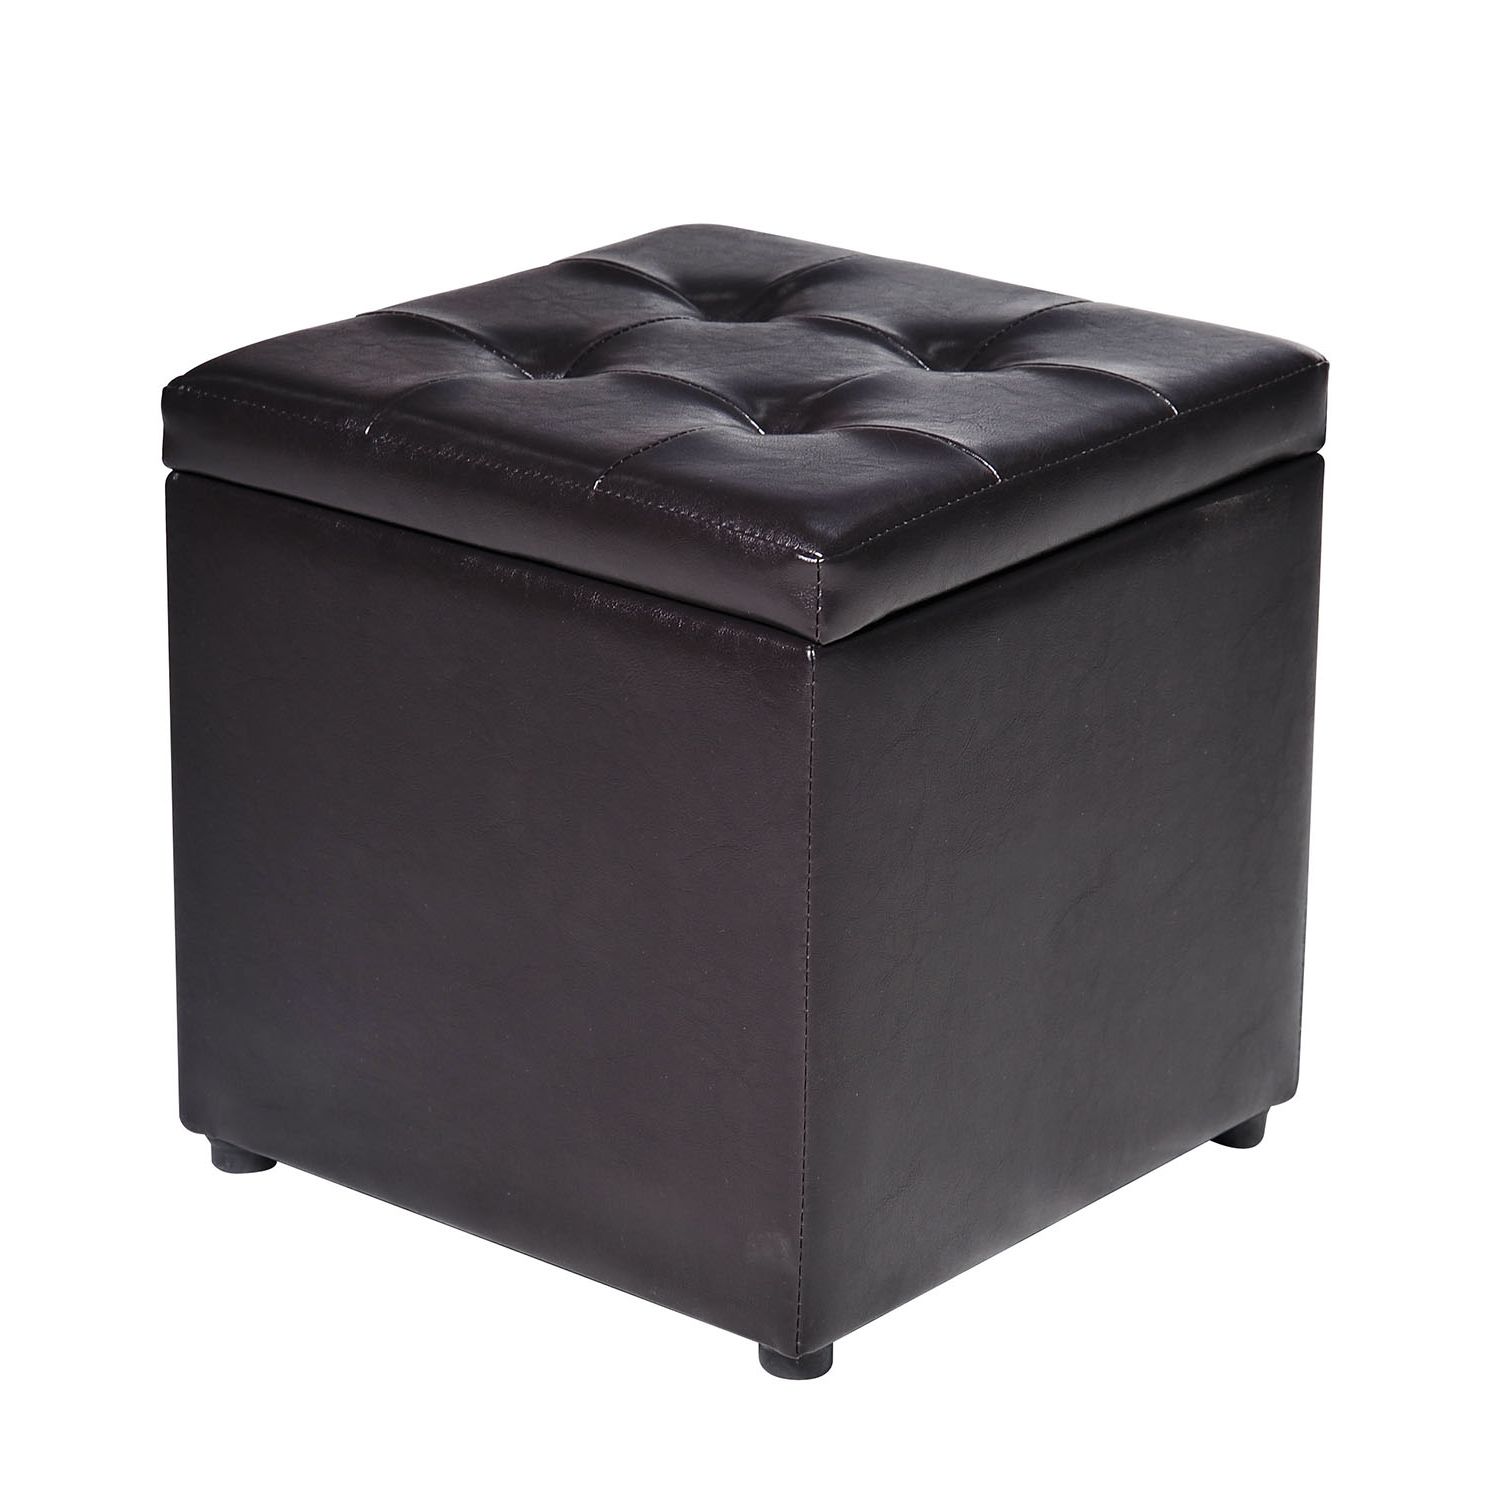 Widely Used Homcom Faux Leather Foot Stool Storage Ottoman – Black With Black Faux Leather Column Tufted Ottomans (View 5 of 10)